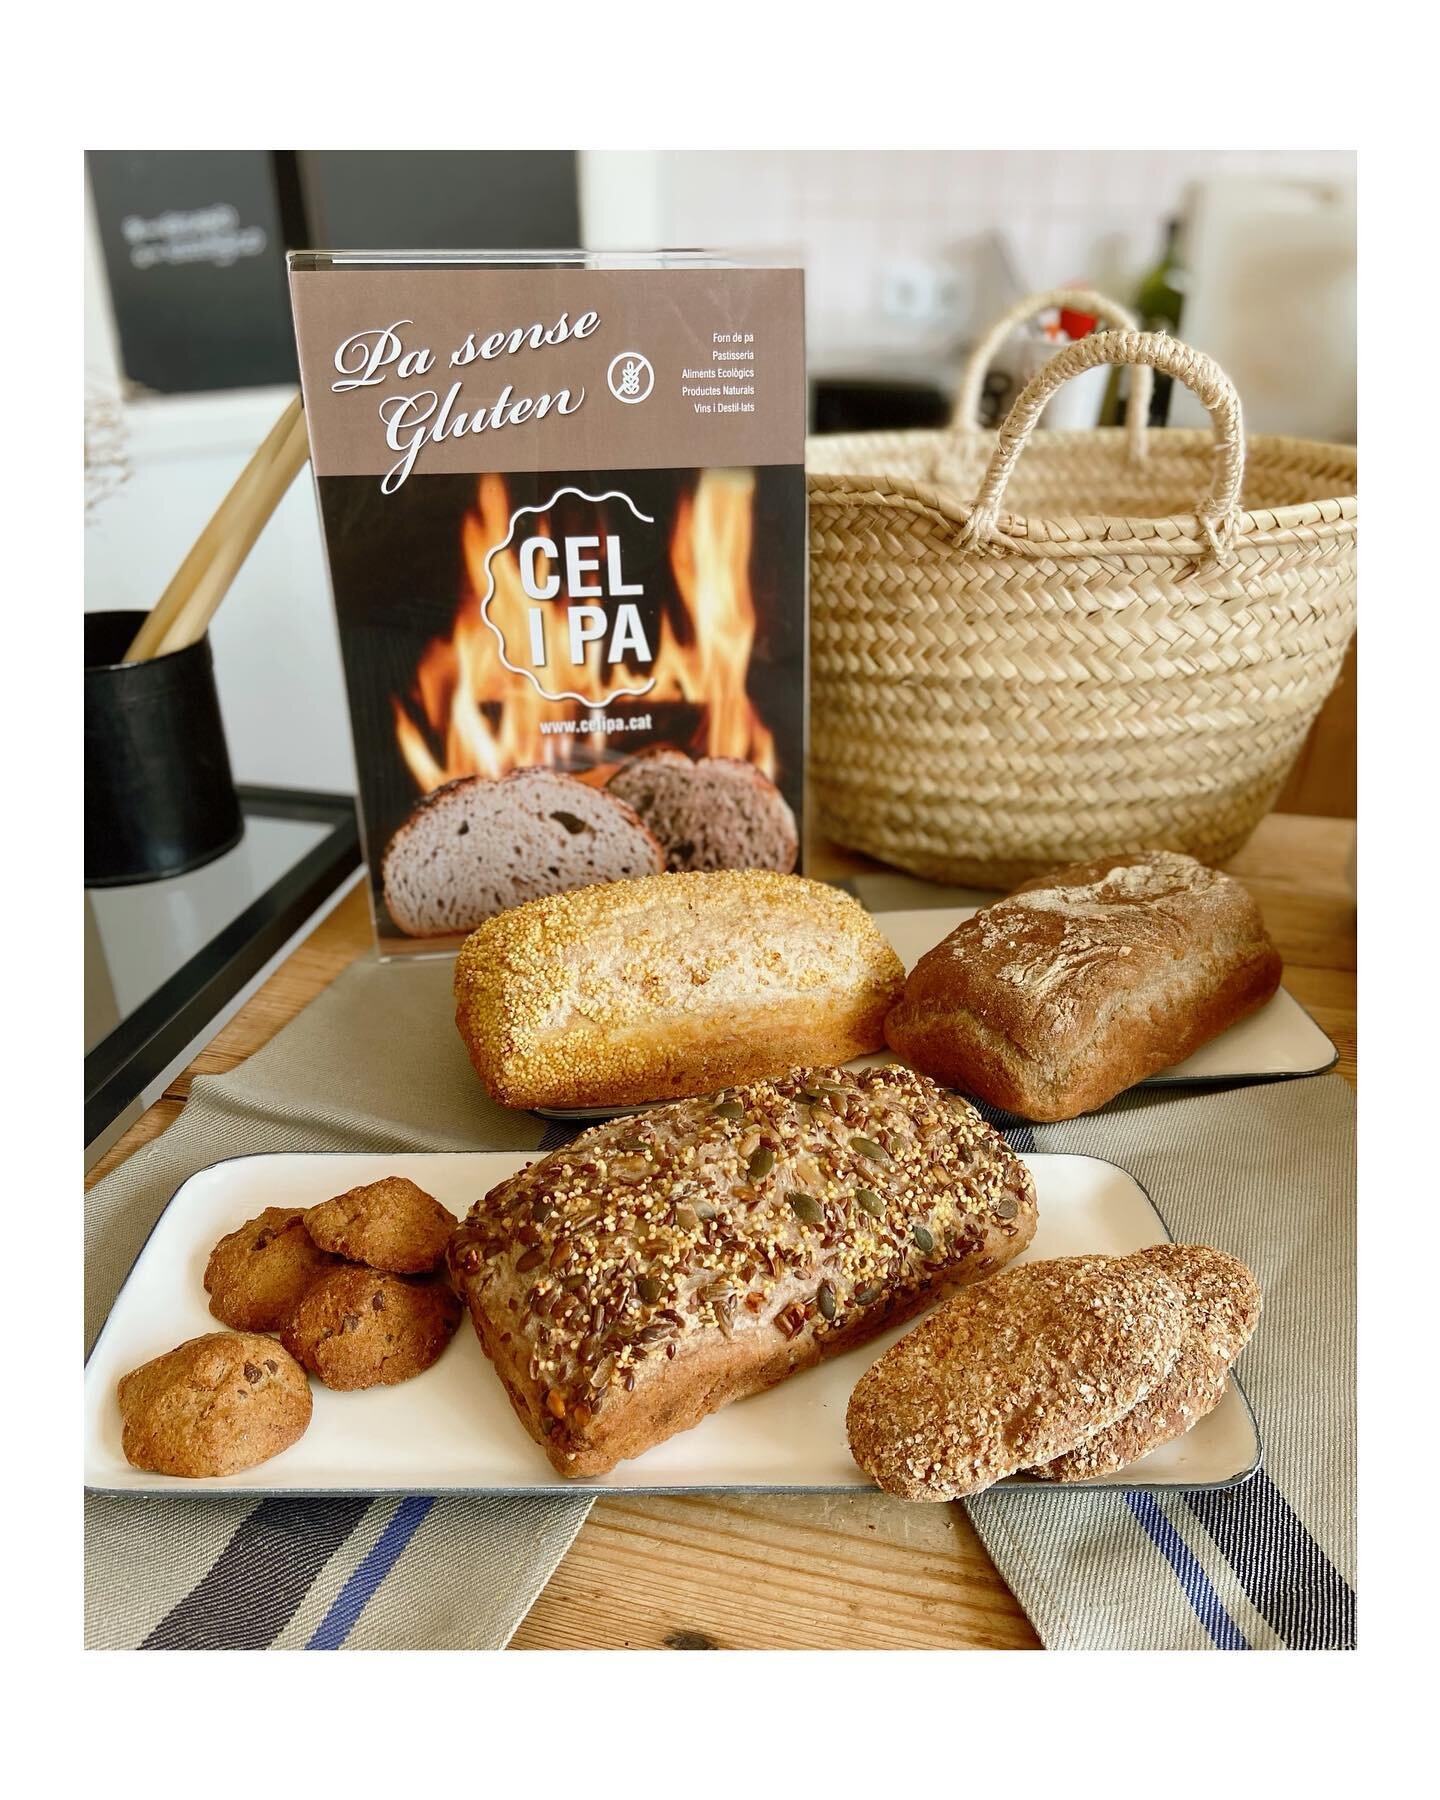 Fresh, gluten free bread and treats now available to order for next day pick up! We are excited to work with @celipa2020bcn - check their website (celipa.cat) for their full menu. Order on their site or here @banksgeneral_bcn and pick it up the next 